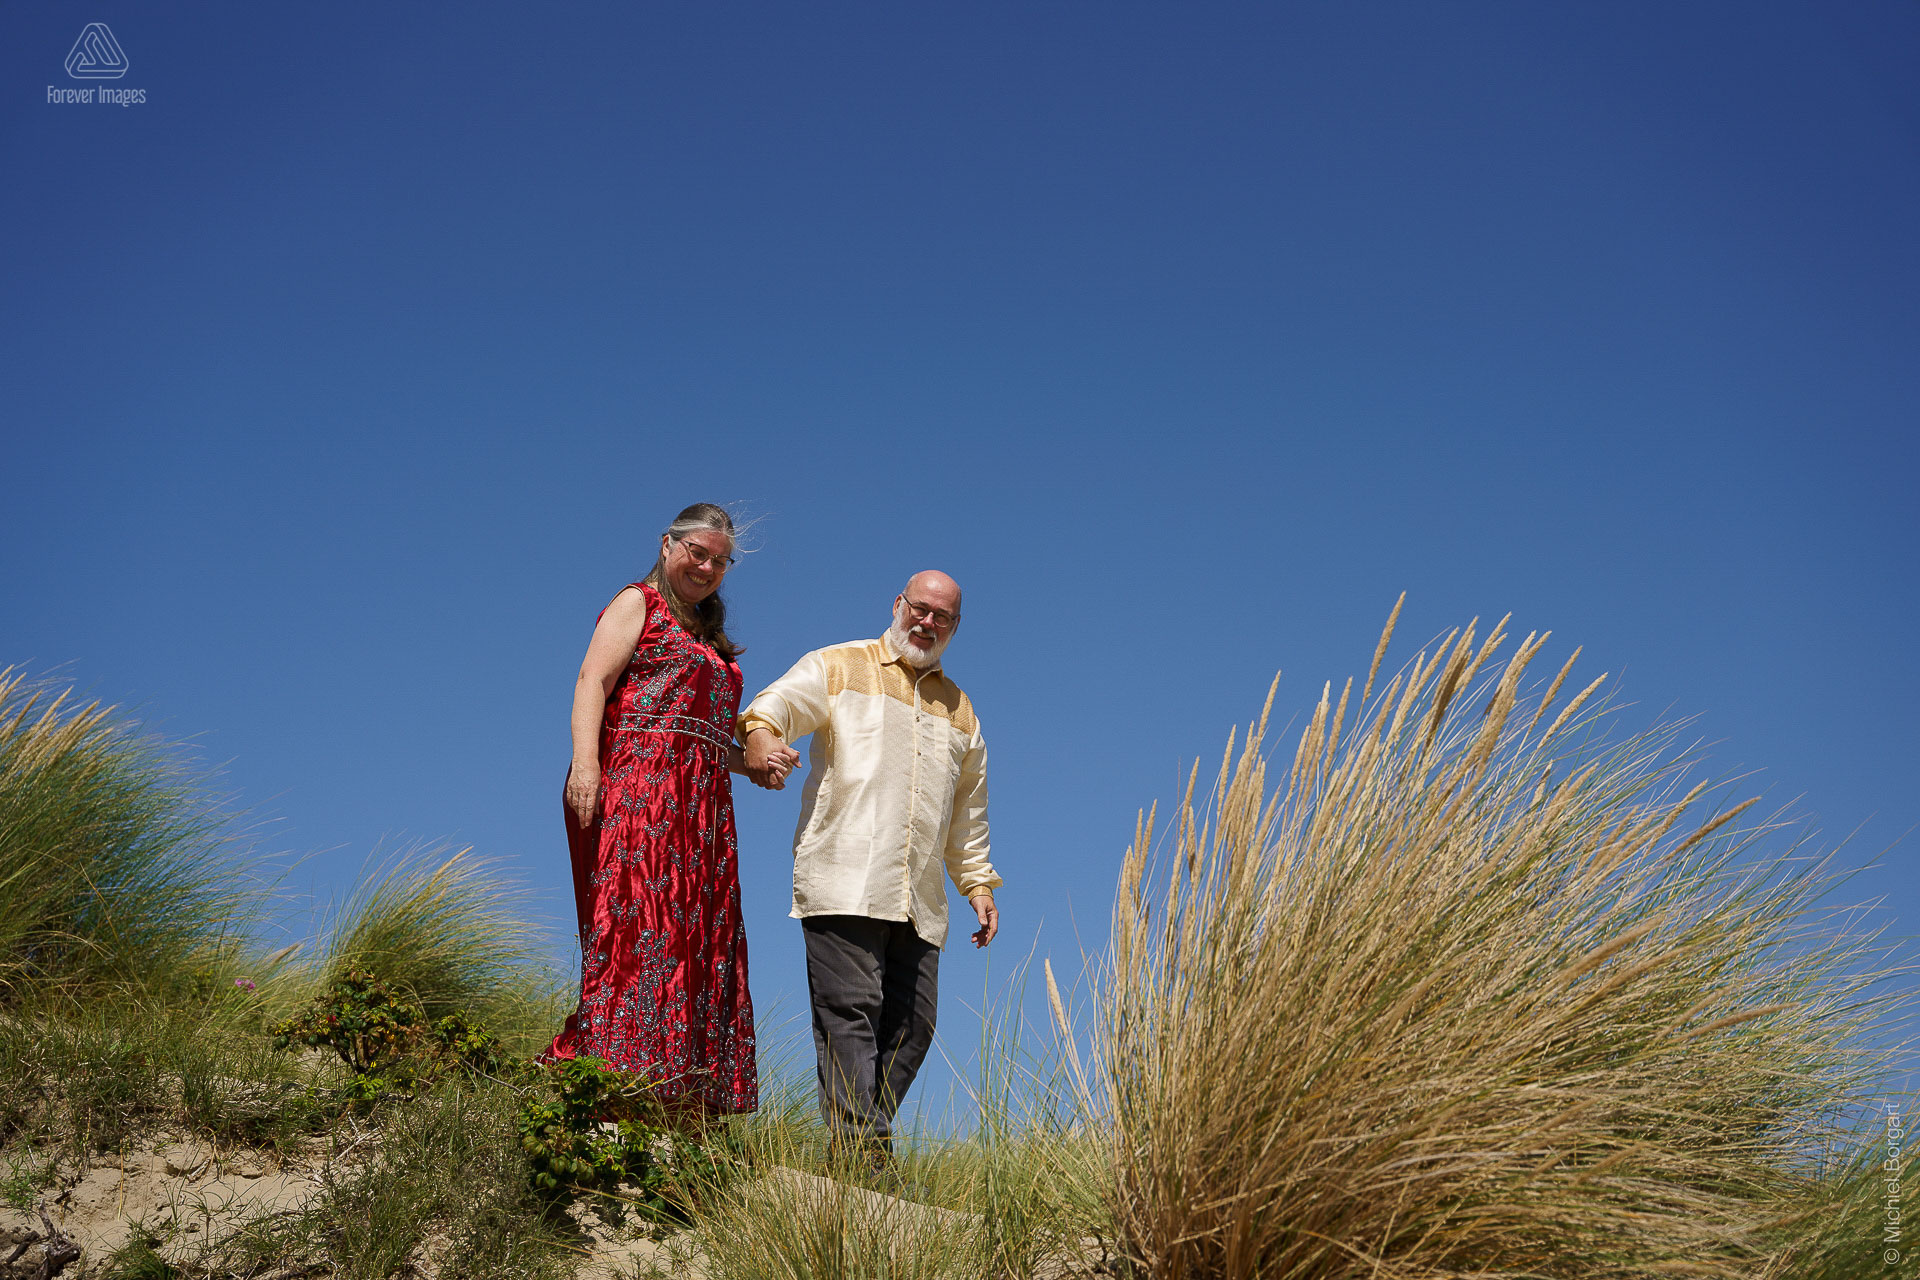 Portrait photo of a happy couple walking in the dunes with a clear blue sky | Henk | Portrait Photographer Michiel Borgart - Forever Images.